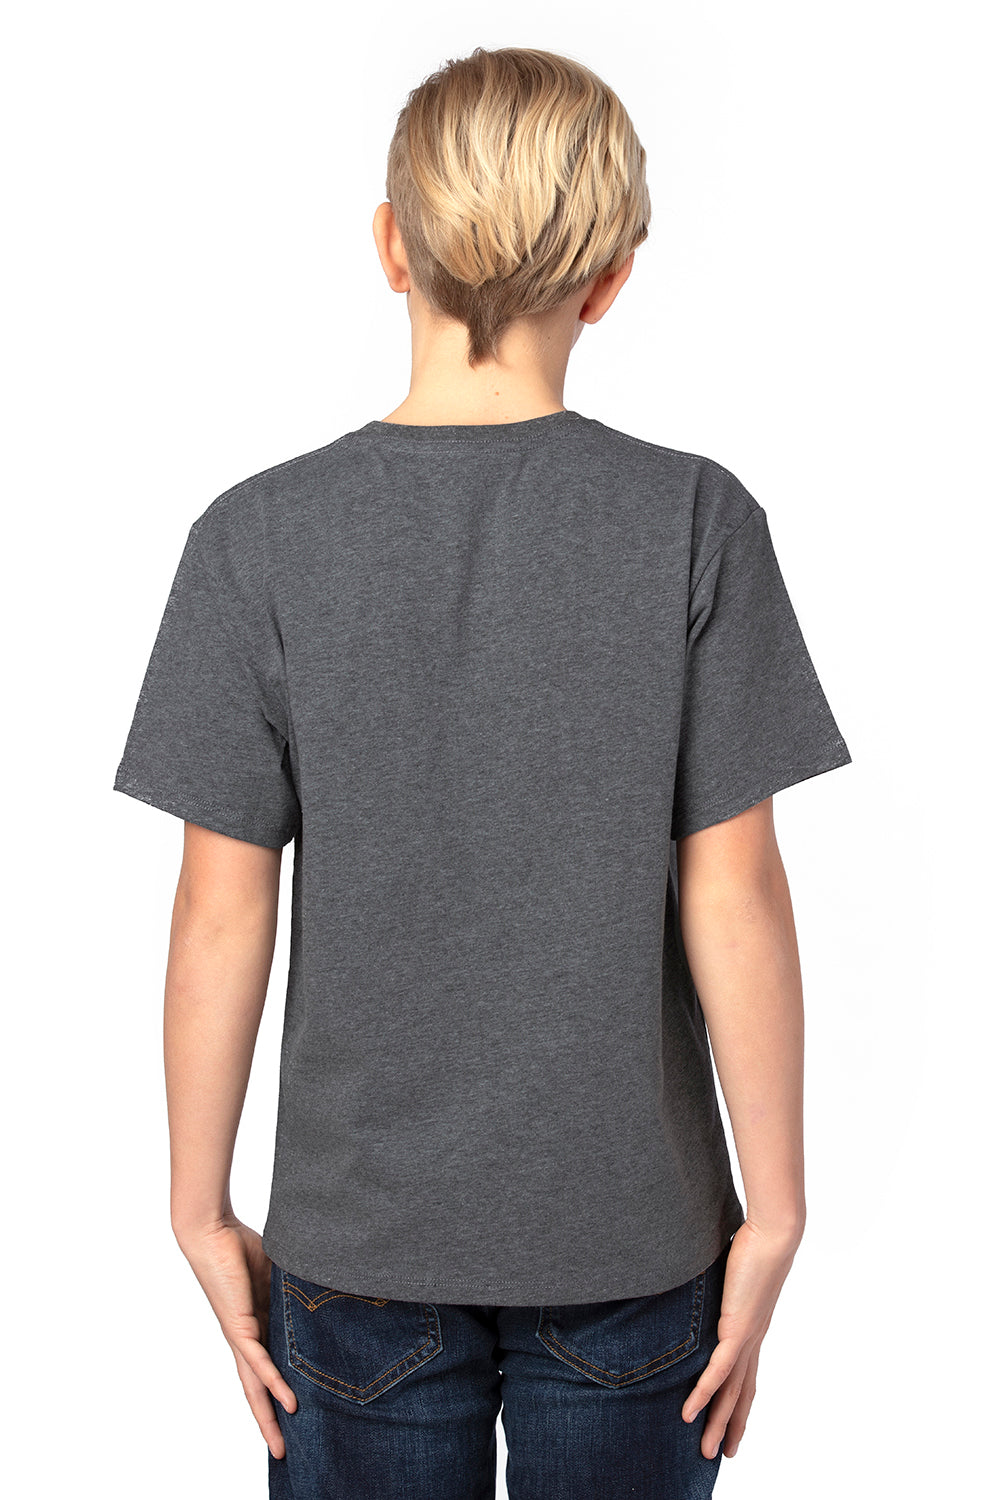 Threadfast Apparel 600A Youth Ultimate Short Sleeve Crewneck T-Shirt Heather Charcoal Grey Back